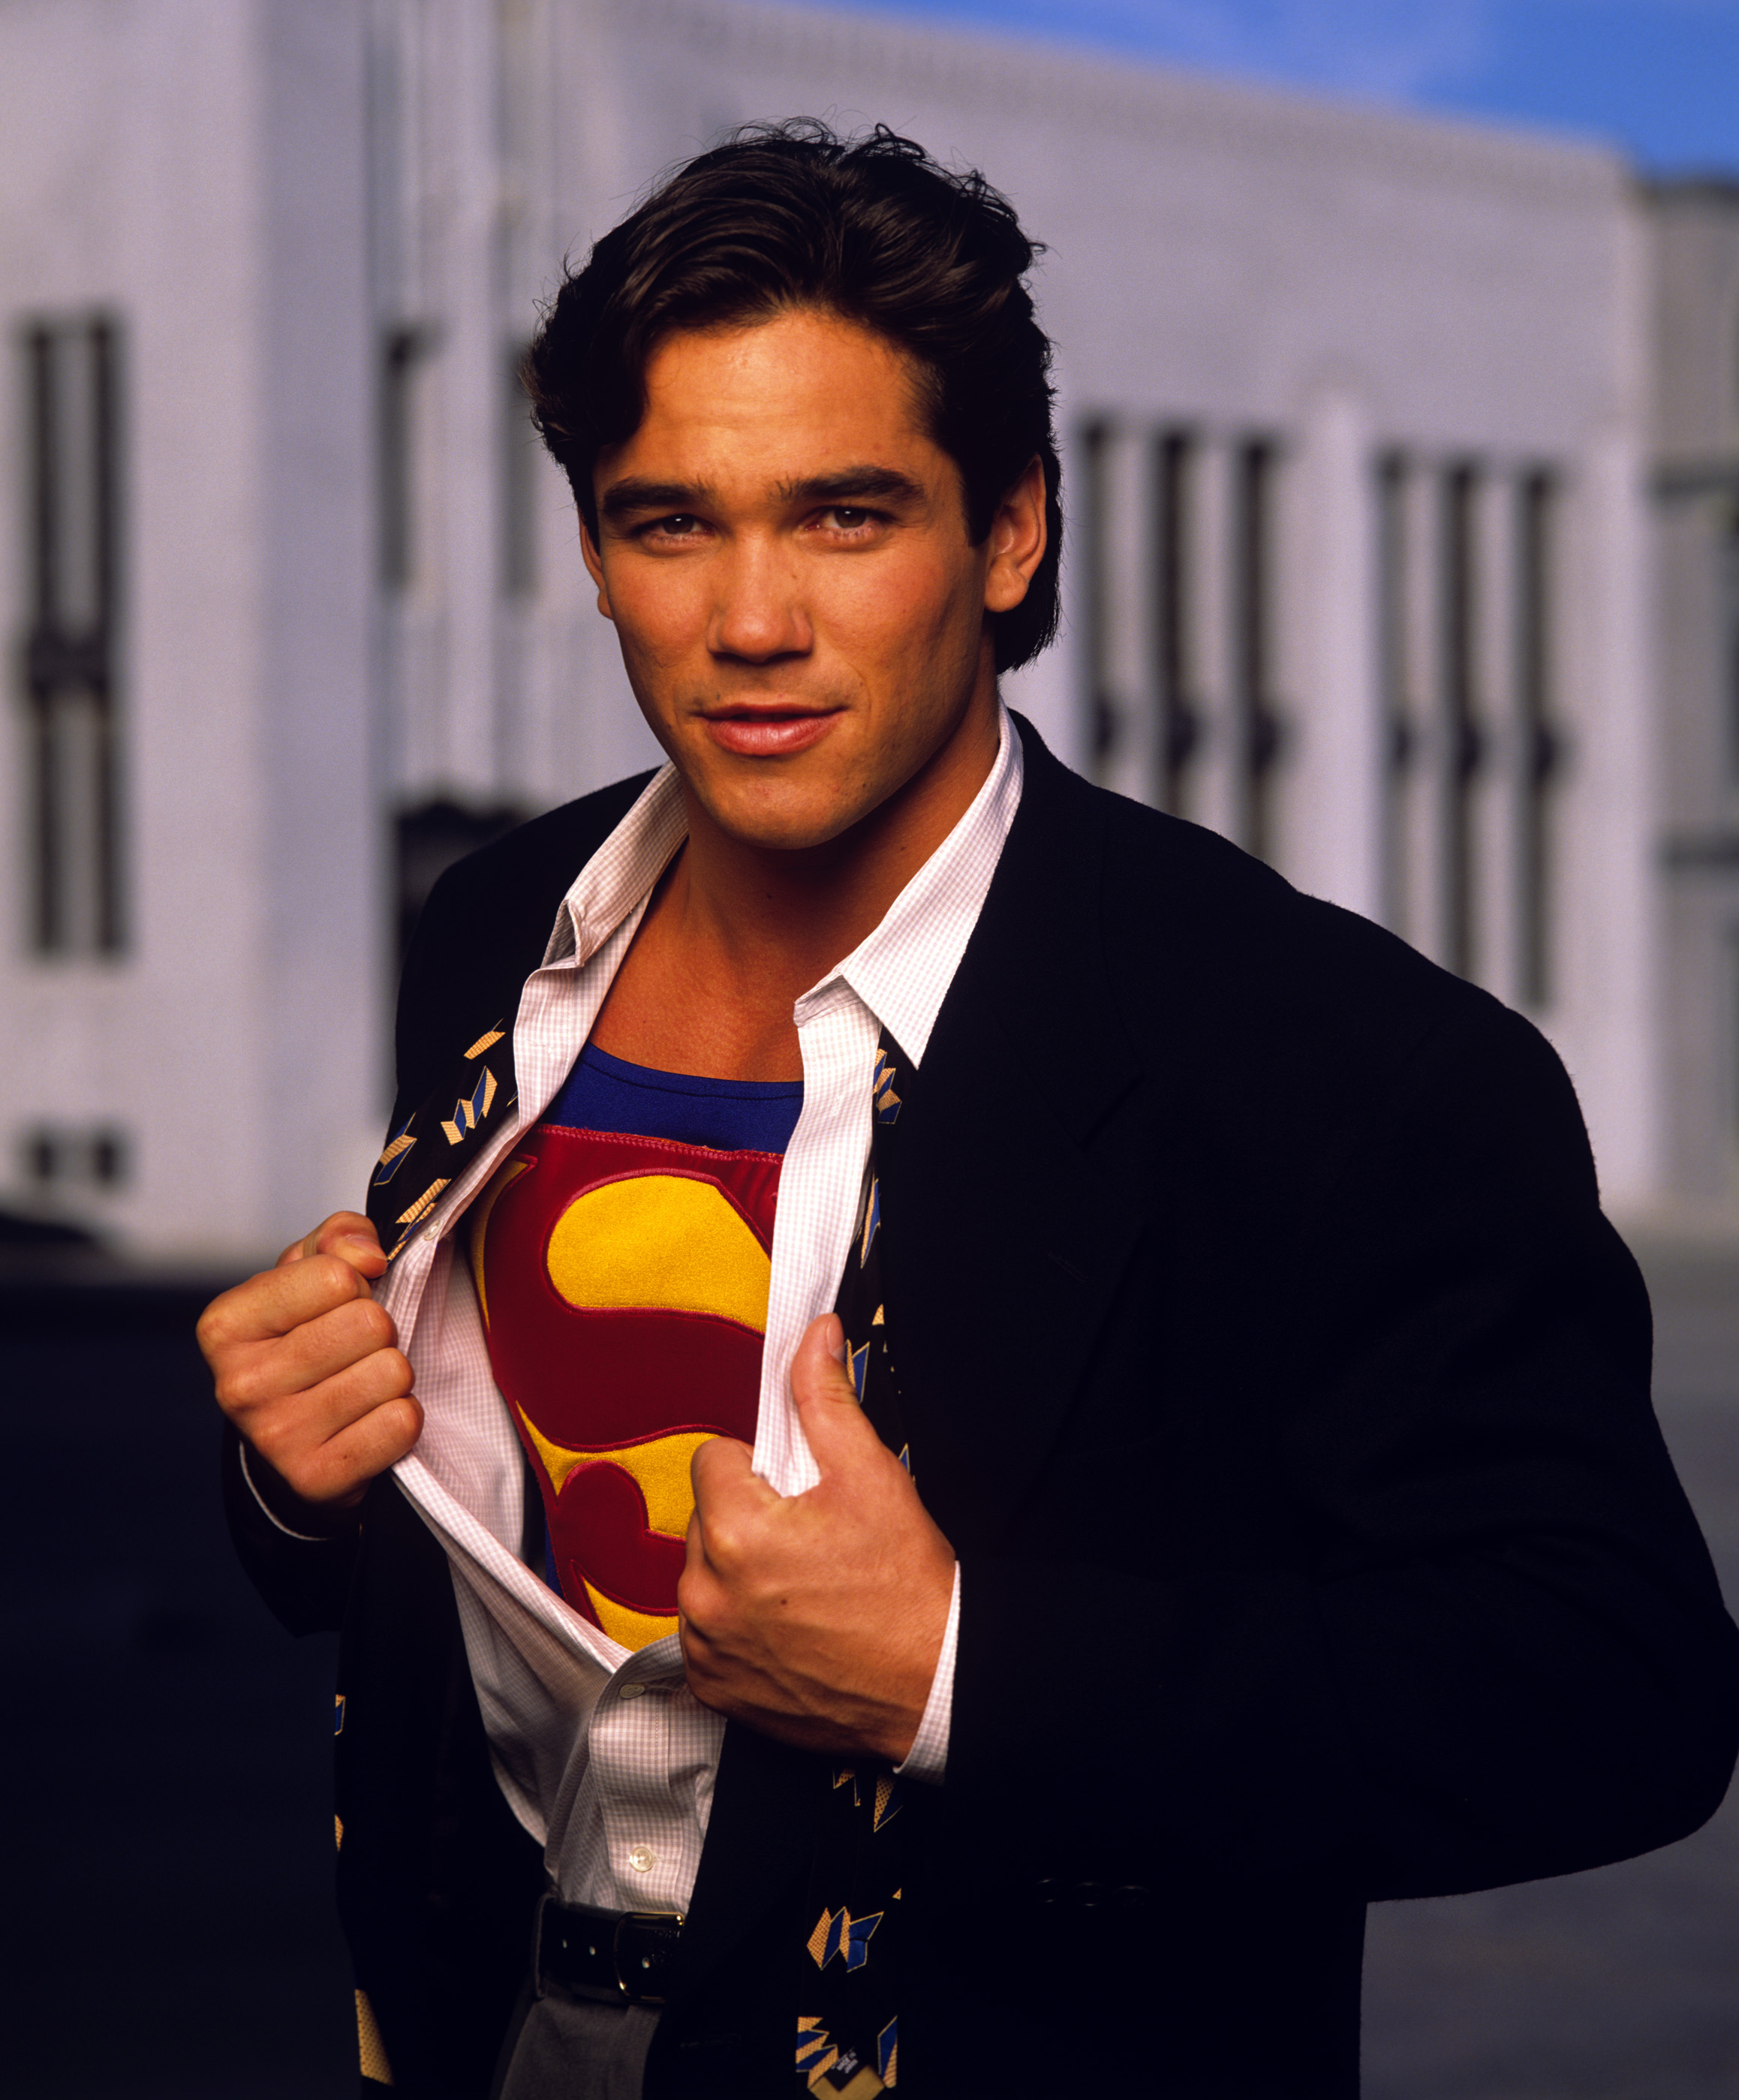 Dean Cain as Superman/Clark Kent in "Lois & Clark: The New Adventures of Superman" on October 7, 1993 | Source: Getty Images